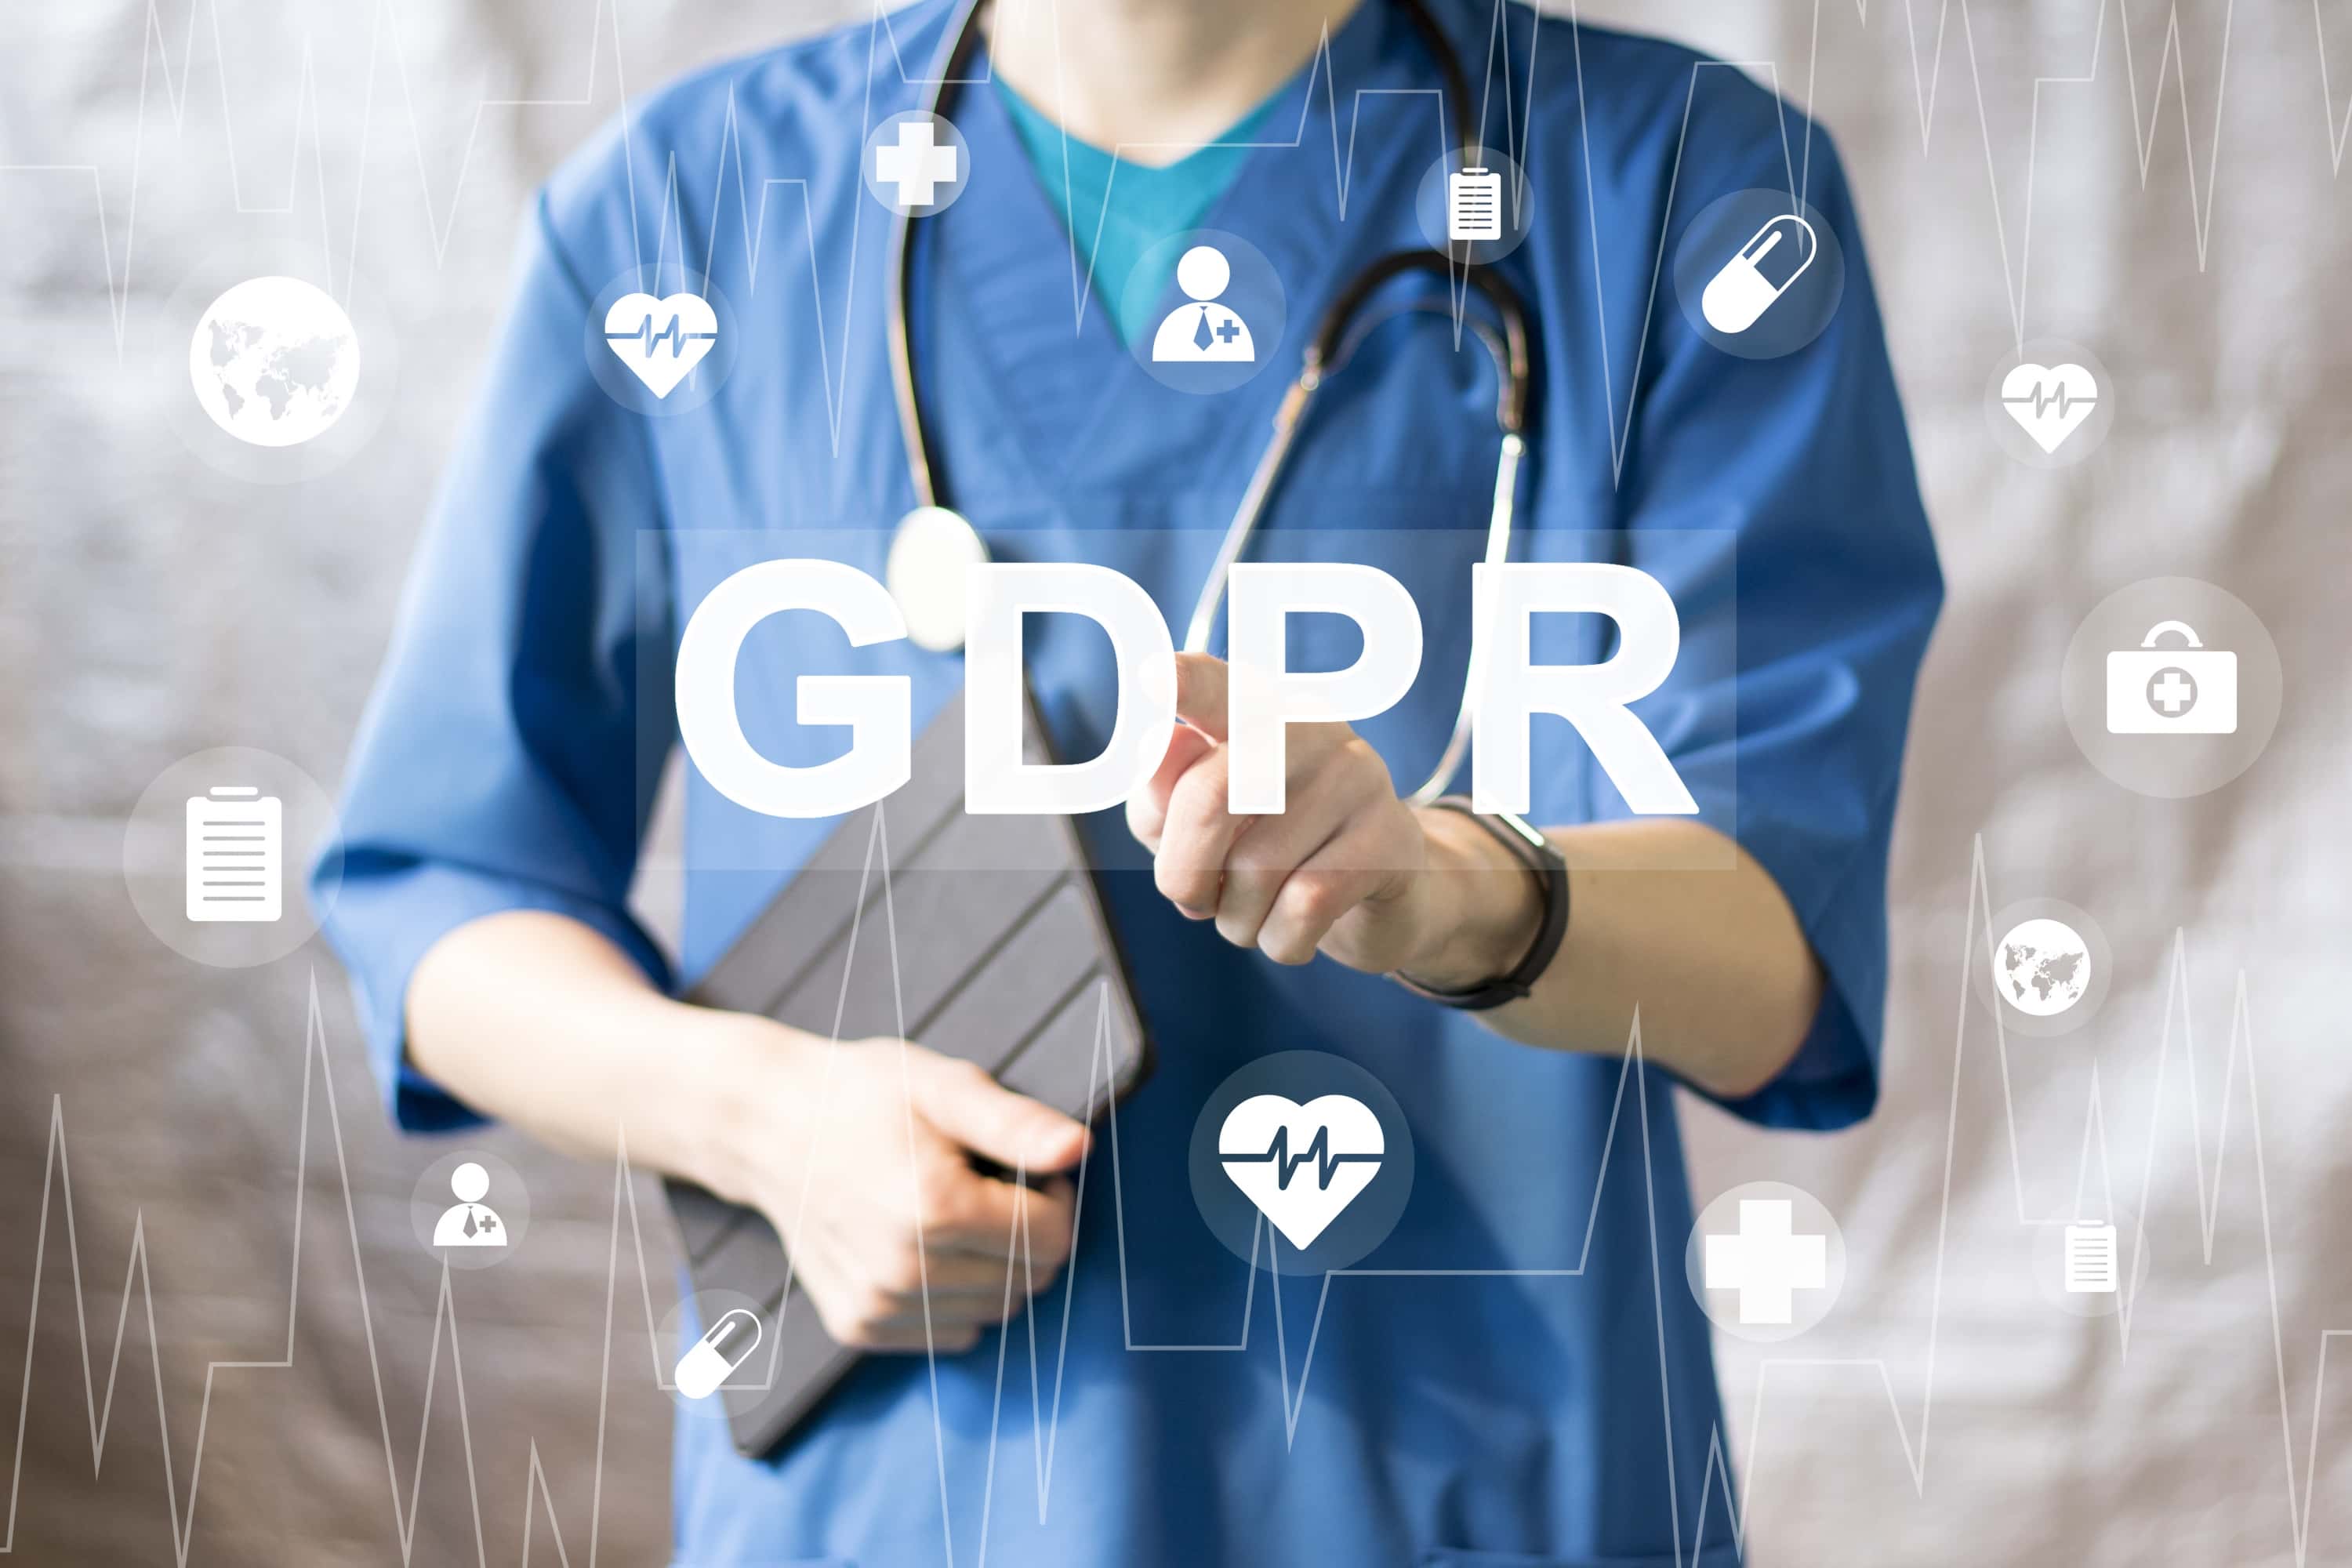 General Data Protection Regulation (GDPR) Act and the U.S. Healthcare